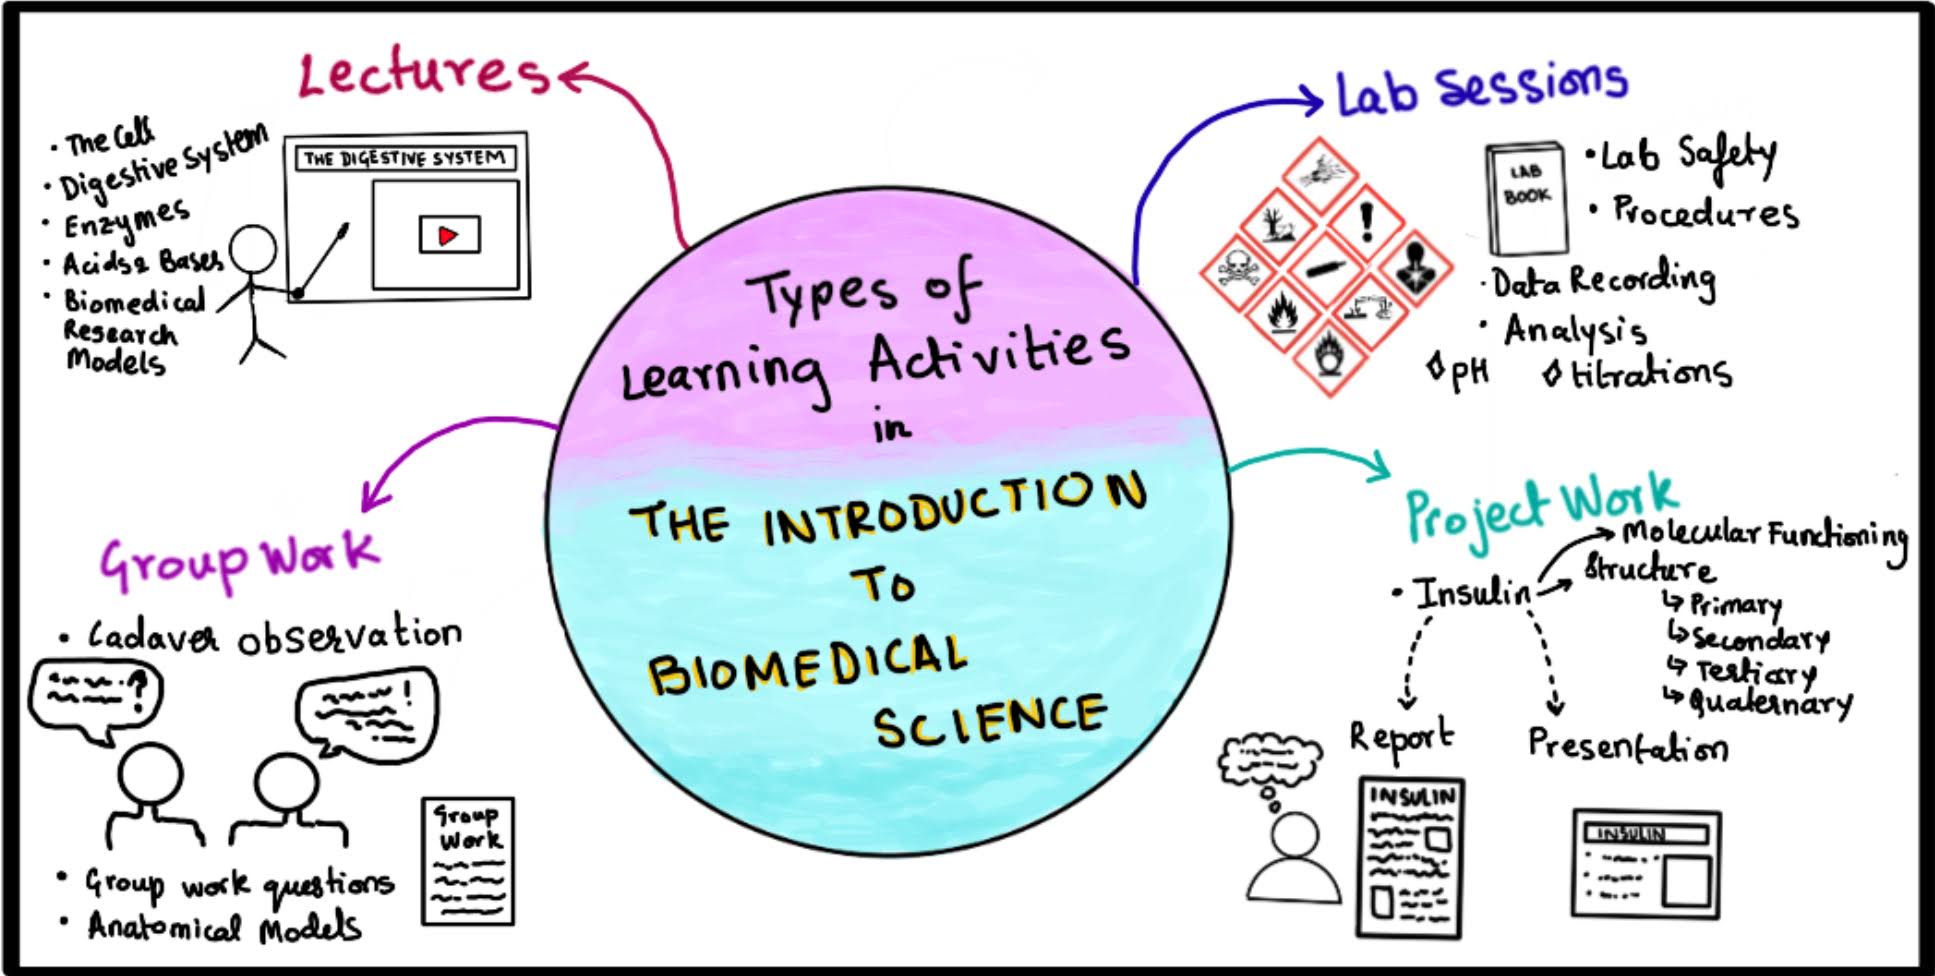 A map of the different learning styles in the Introduction to Biomedical Science Course. It consists of 4 different learning activities. Lectures are on topics like cells, the digestive system, enzymes, acids and bases, and biomedical research models. Lab Sessions include lab safety, procedures, data recording, and analysis on pH and titration labs. Group Work includes cadaver observation, group work questions and anatomical models. Project Work is about molecular functioning and structure (primary, secondary,, teriary, and quaternary) of insulin in a report and presentation. Photo credits: Inika Prasad